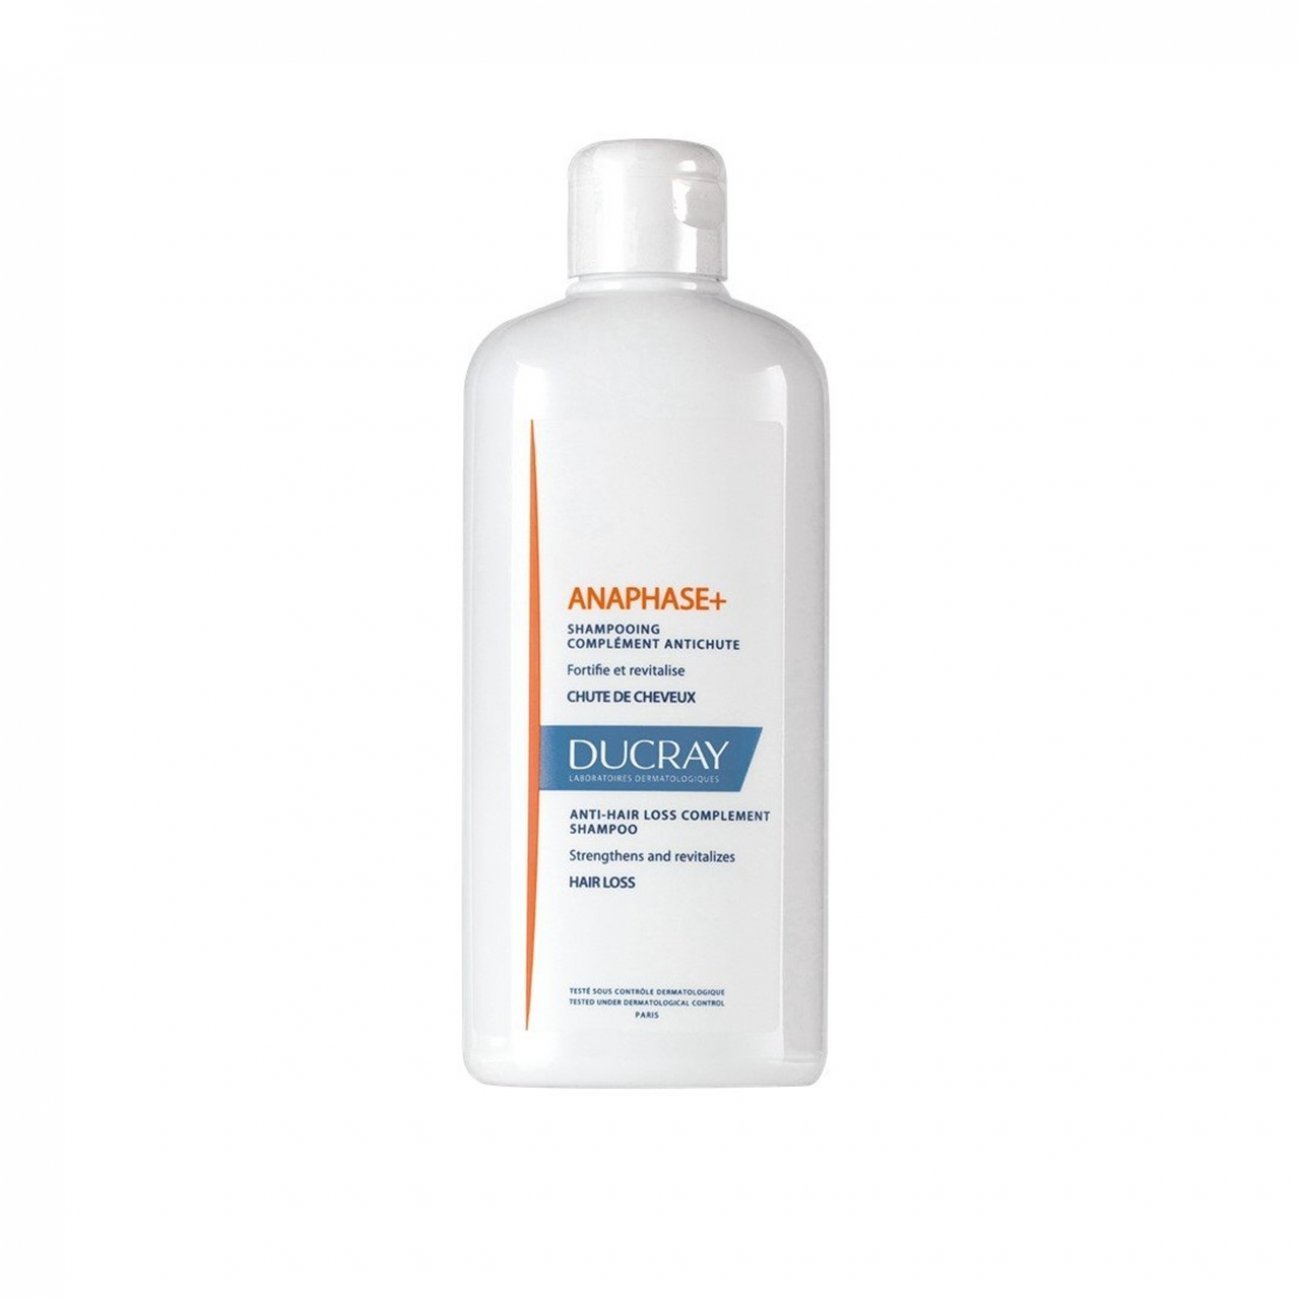 Buy Ducray Anaphase+ Anti-Hair Loss Complement Shampoo ·